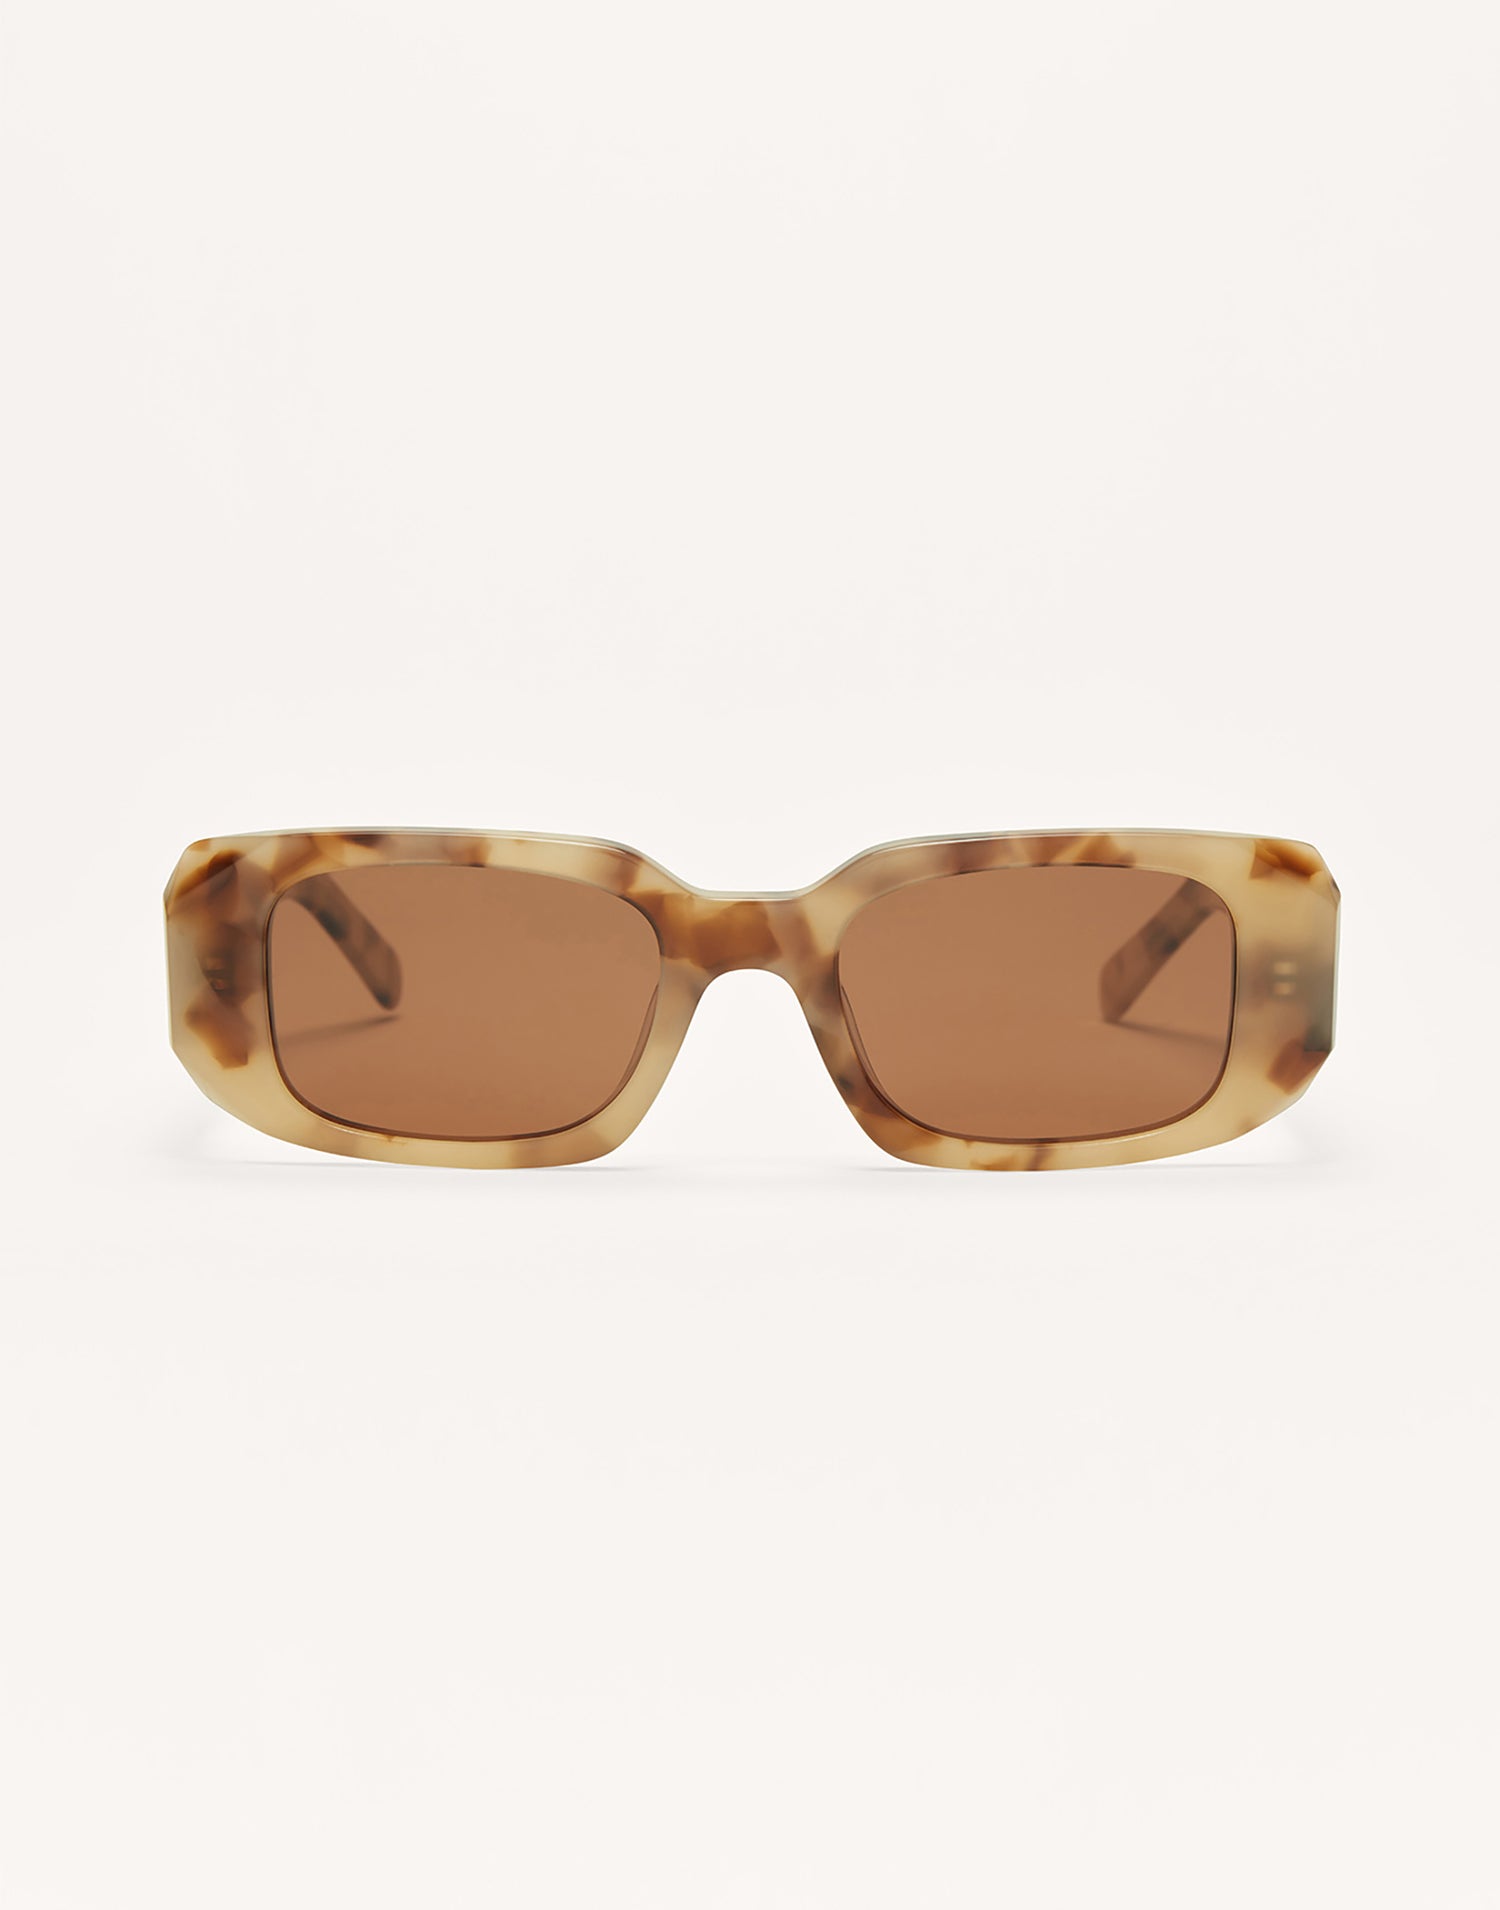 Off Duty Sunglasses by Z Supply in Blonde Tort - Front View